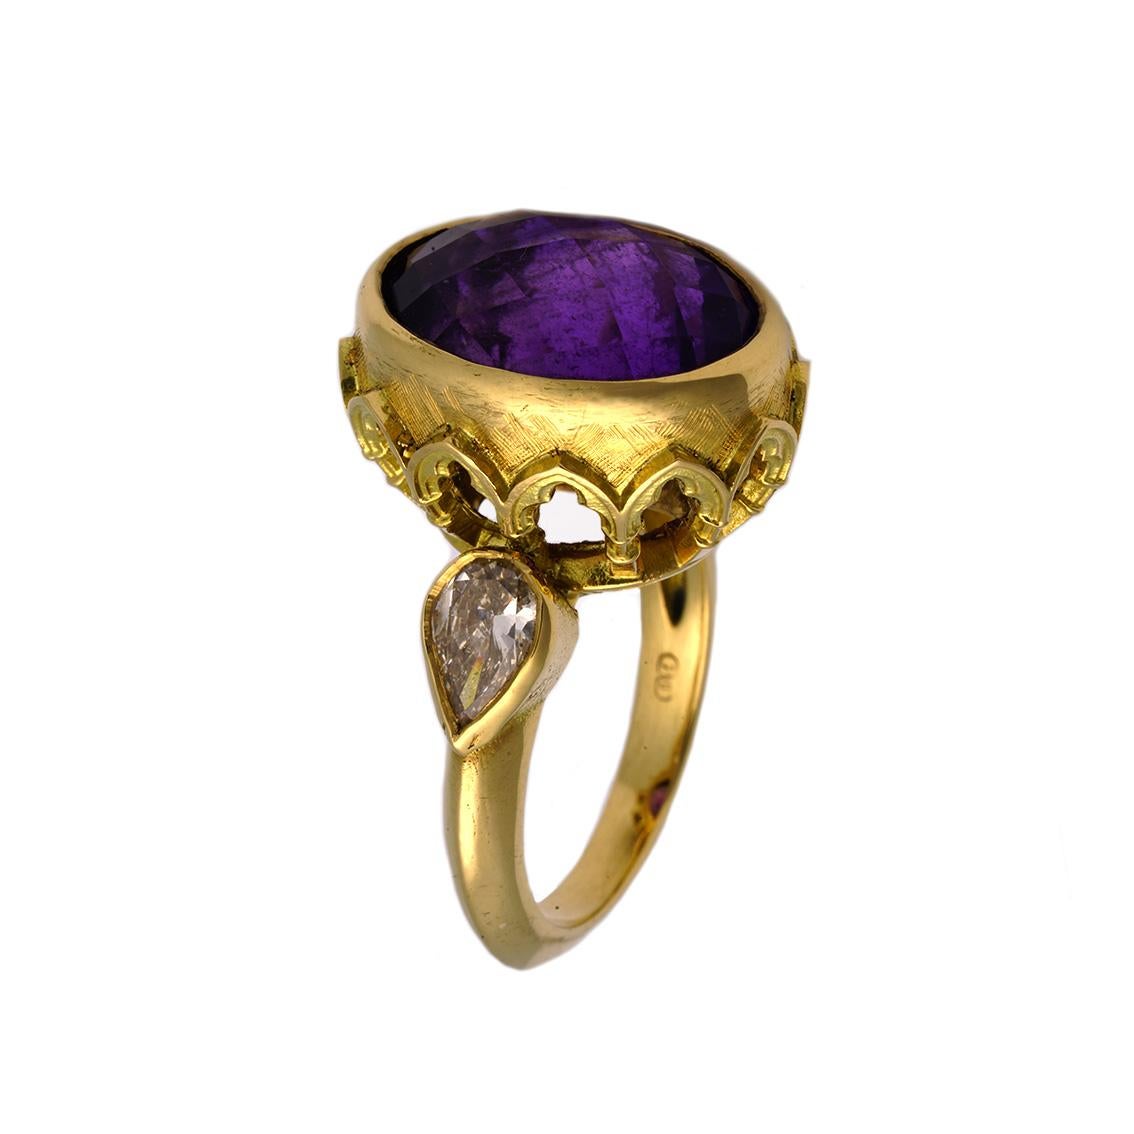 This fascinating ring titled The Vivid Splendor Ring is an absolutely magnificent, one of a kind piece and fits a size.

 Handmade in 18kt yellow gold, the ring features an oval checkerboard cut amethyst, approximately 18.25ct in weight and deep